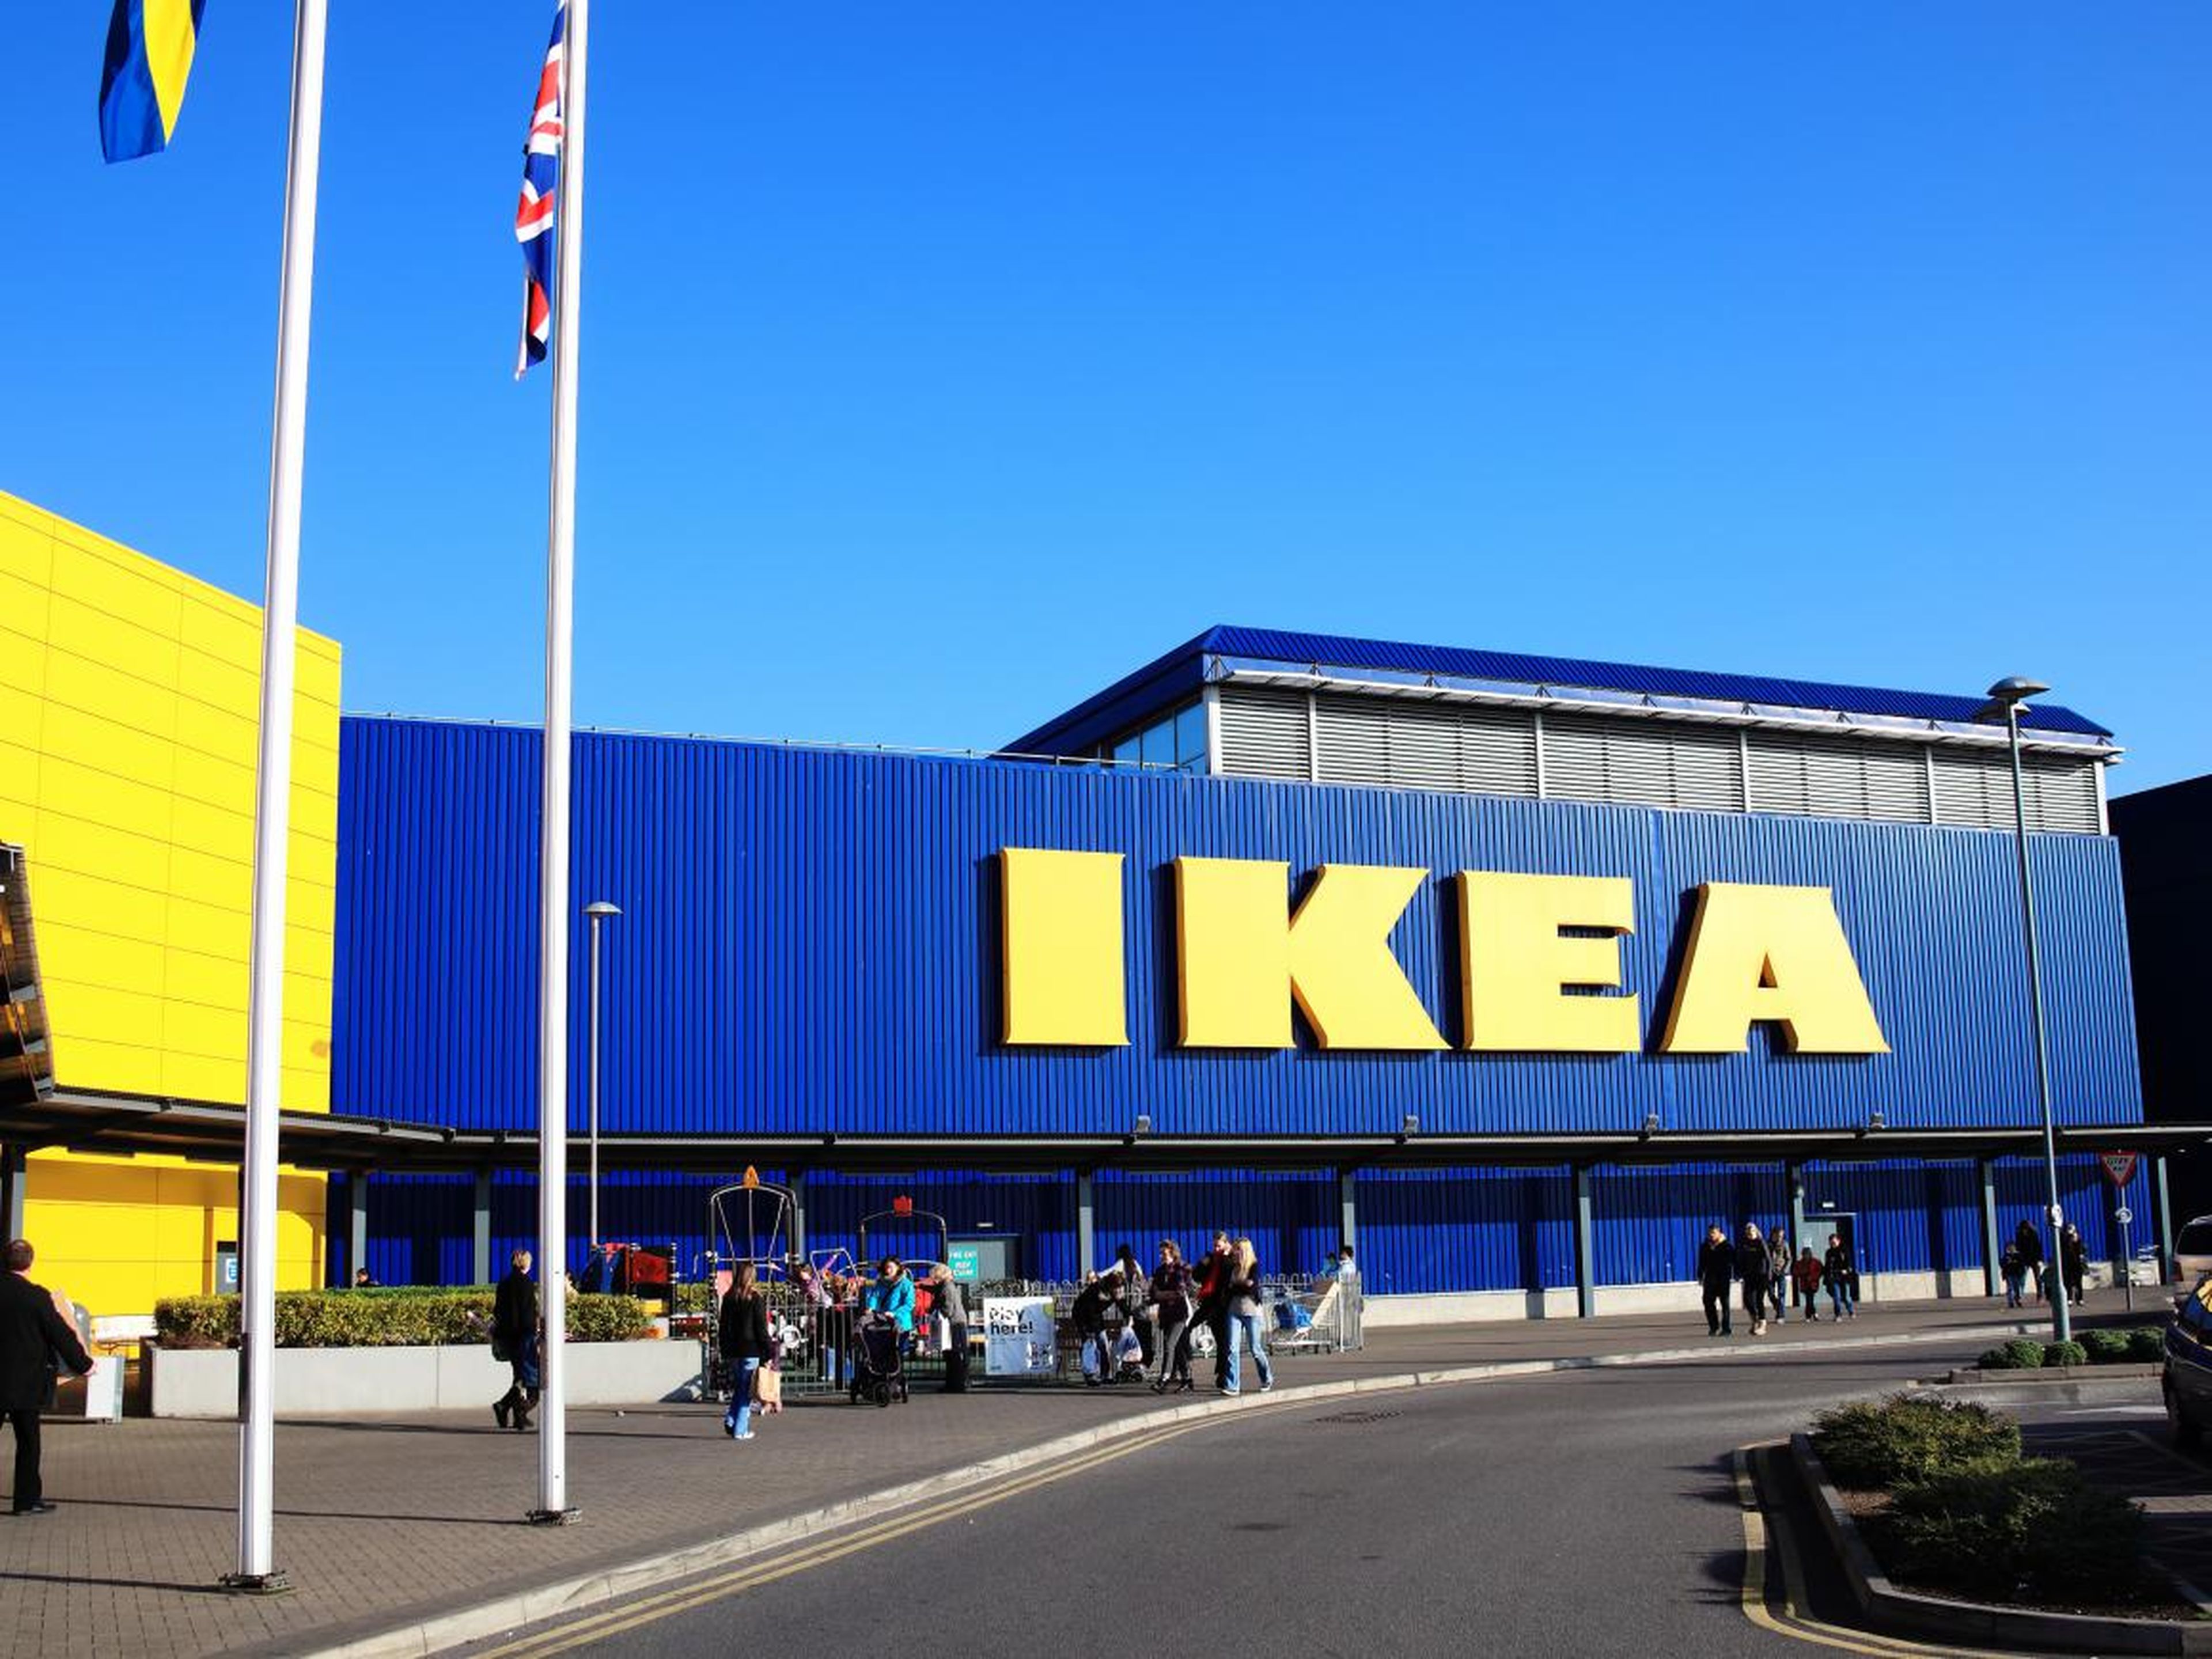 There are hundreds of IKEA locations around the globe.